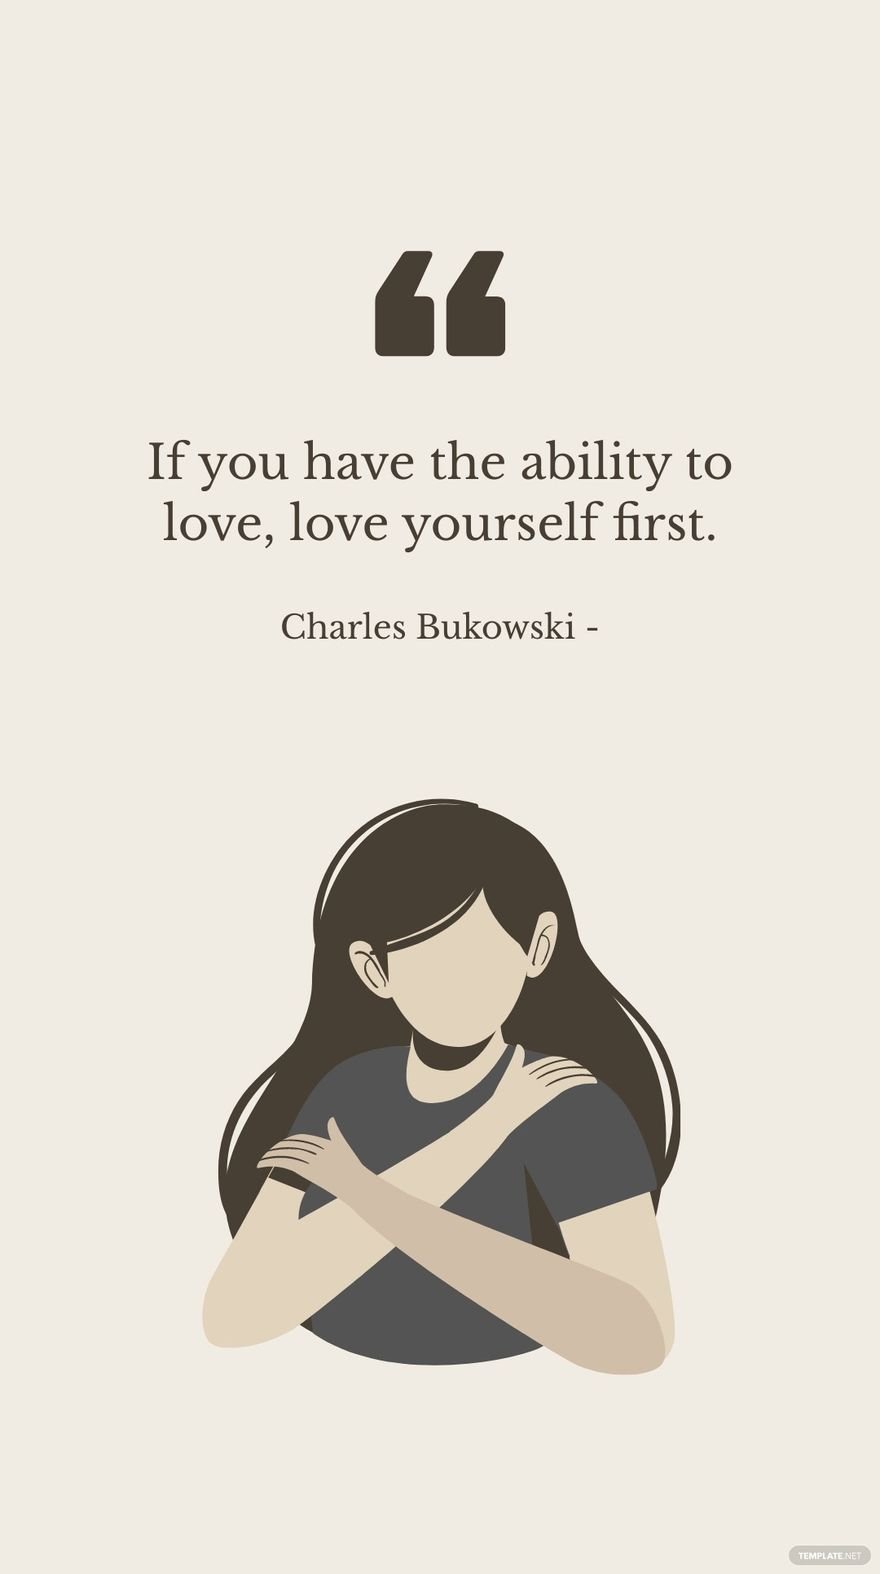 Charles Bukowski - If you have the ability to love, love yourself first. in JPG